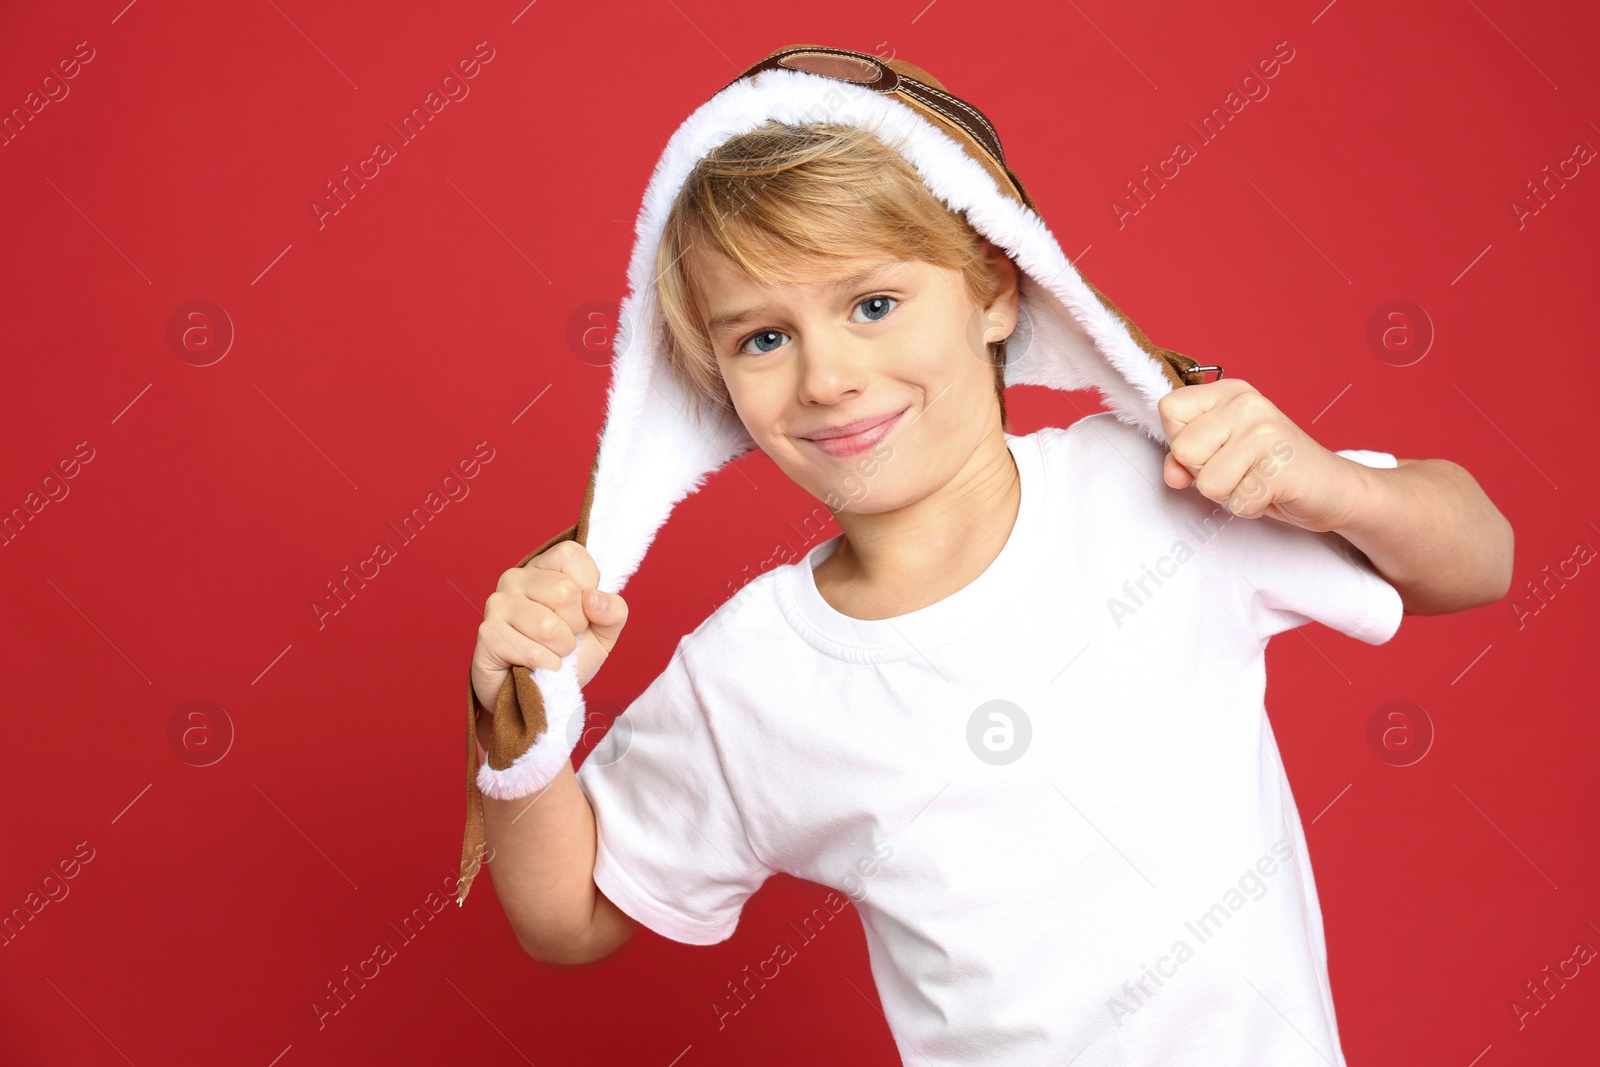 Photo of Cute little boy wearing hat on red background